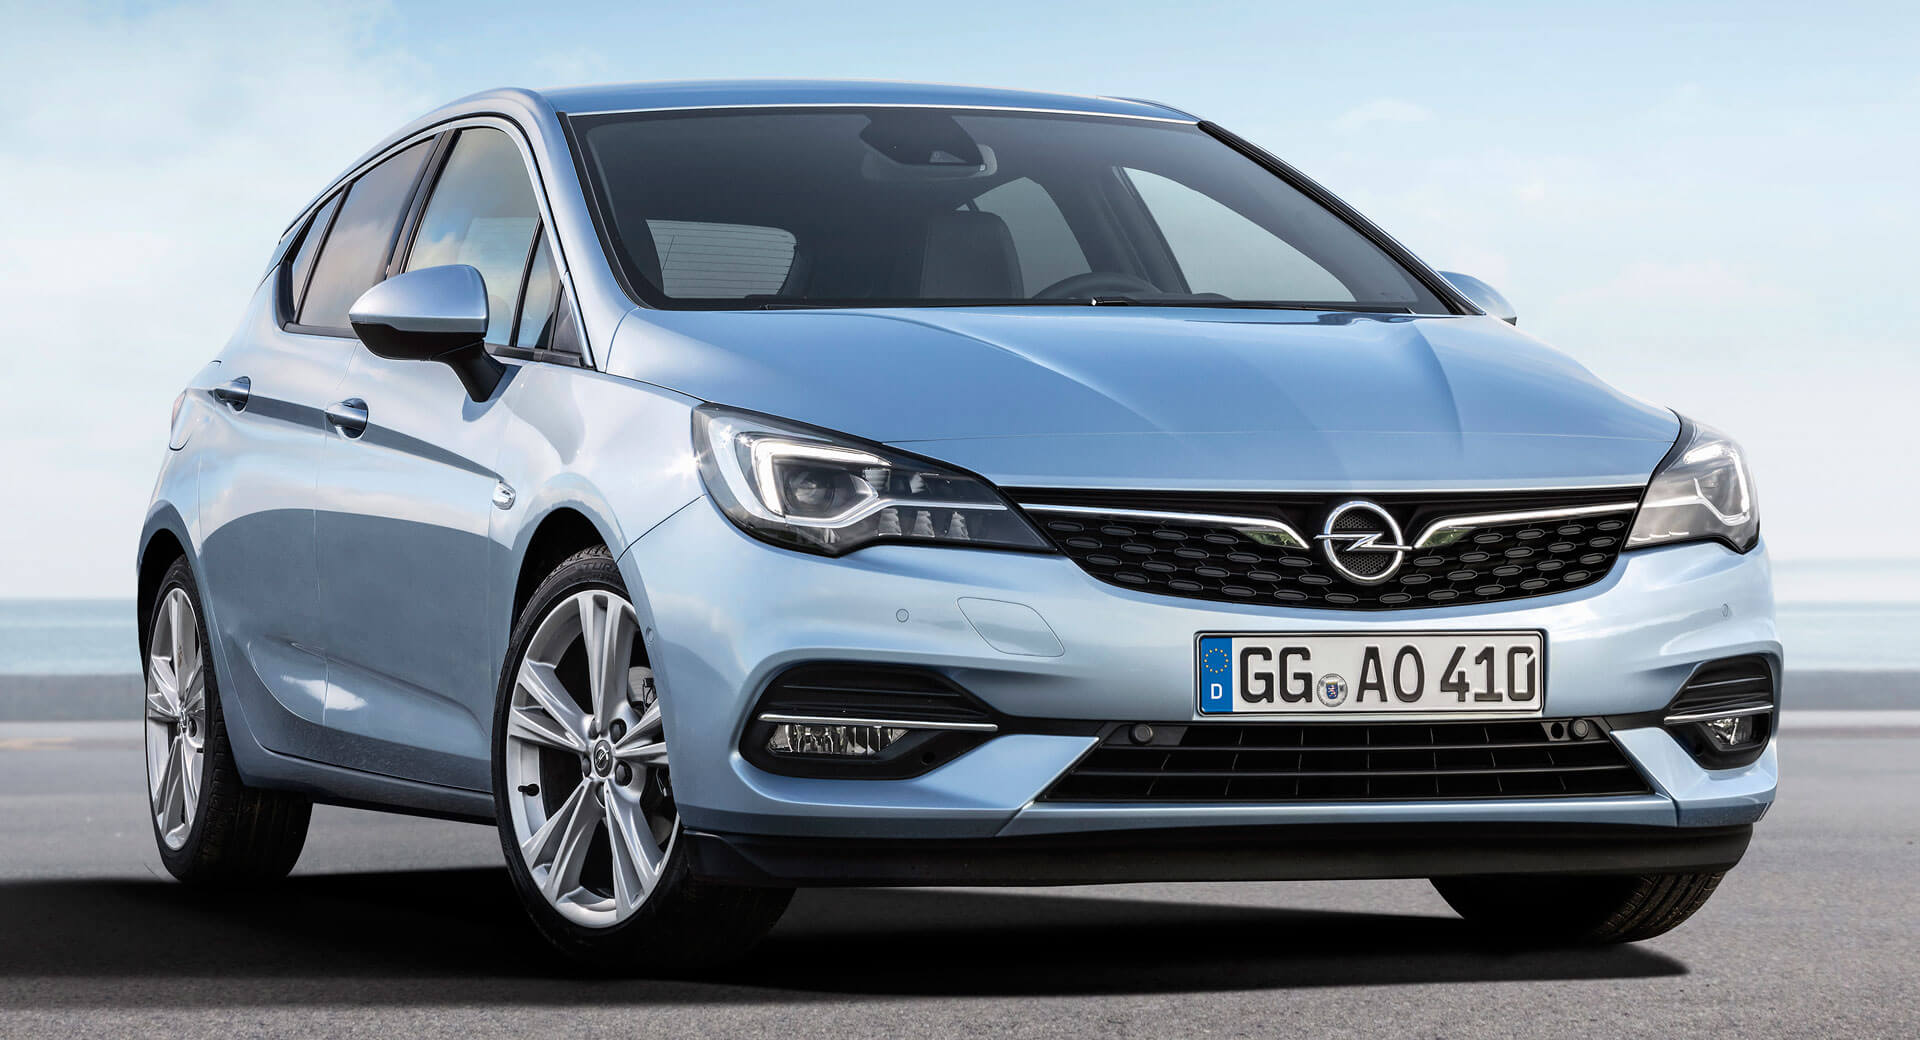 Opel Astra H Hatchback Photos and Specs. Photo: Opel Astra H Hatchback  review and 22 perfect photos of Opel Astra H Hatchback